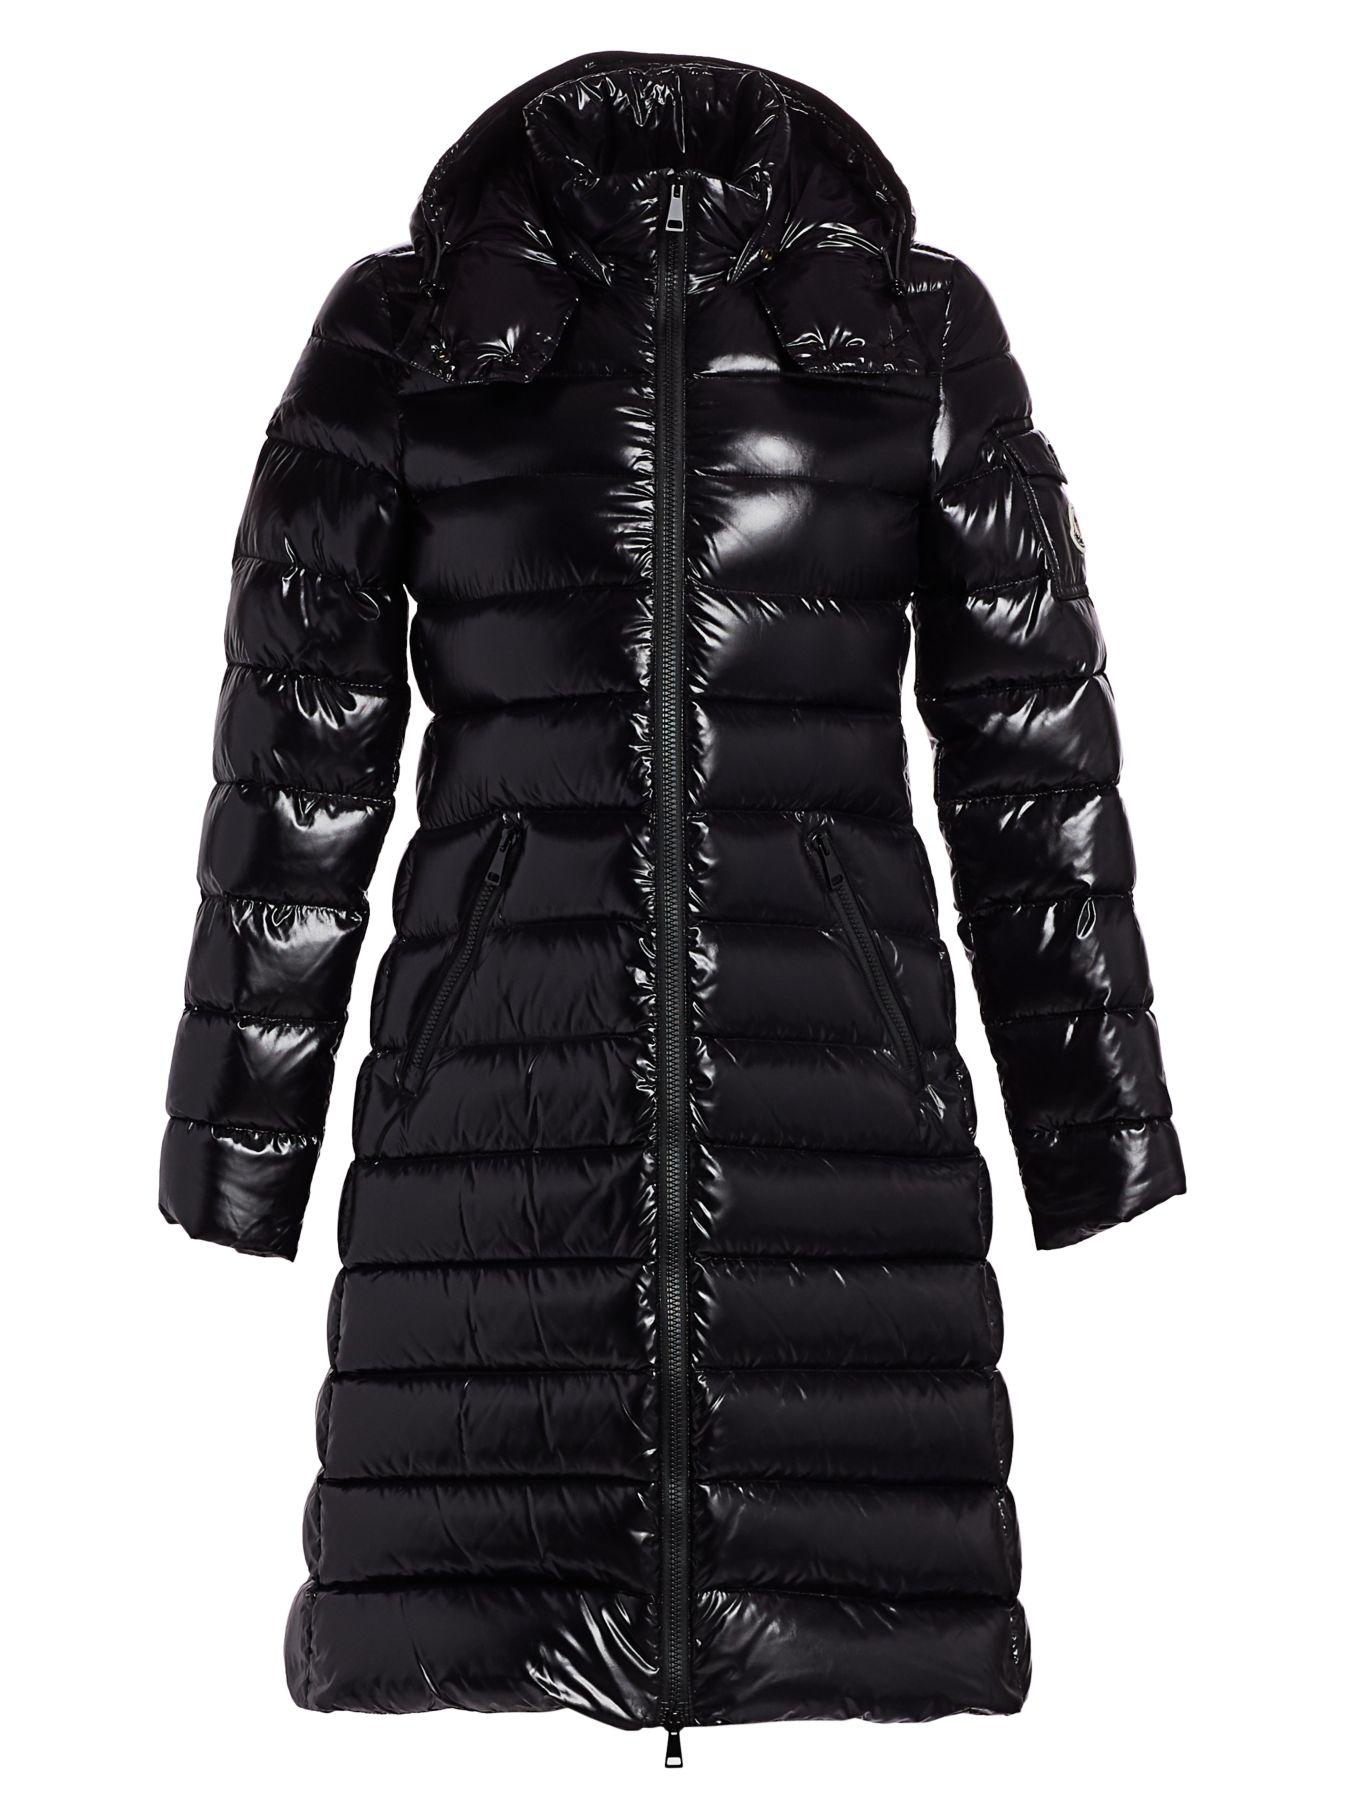 Moncler Synthetic Moka Lacquer Long Puffer Coat in Black - Lyst